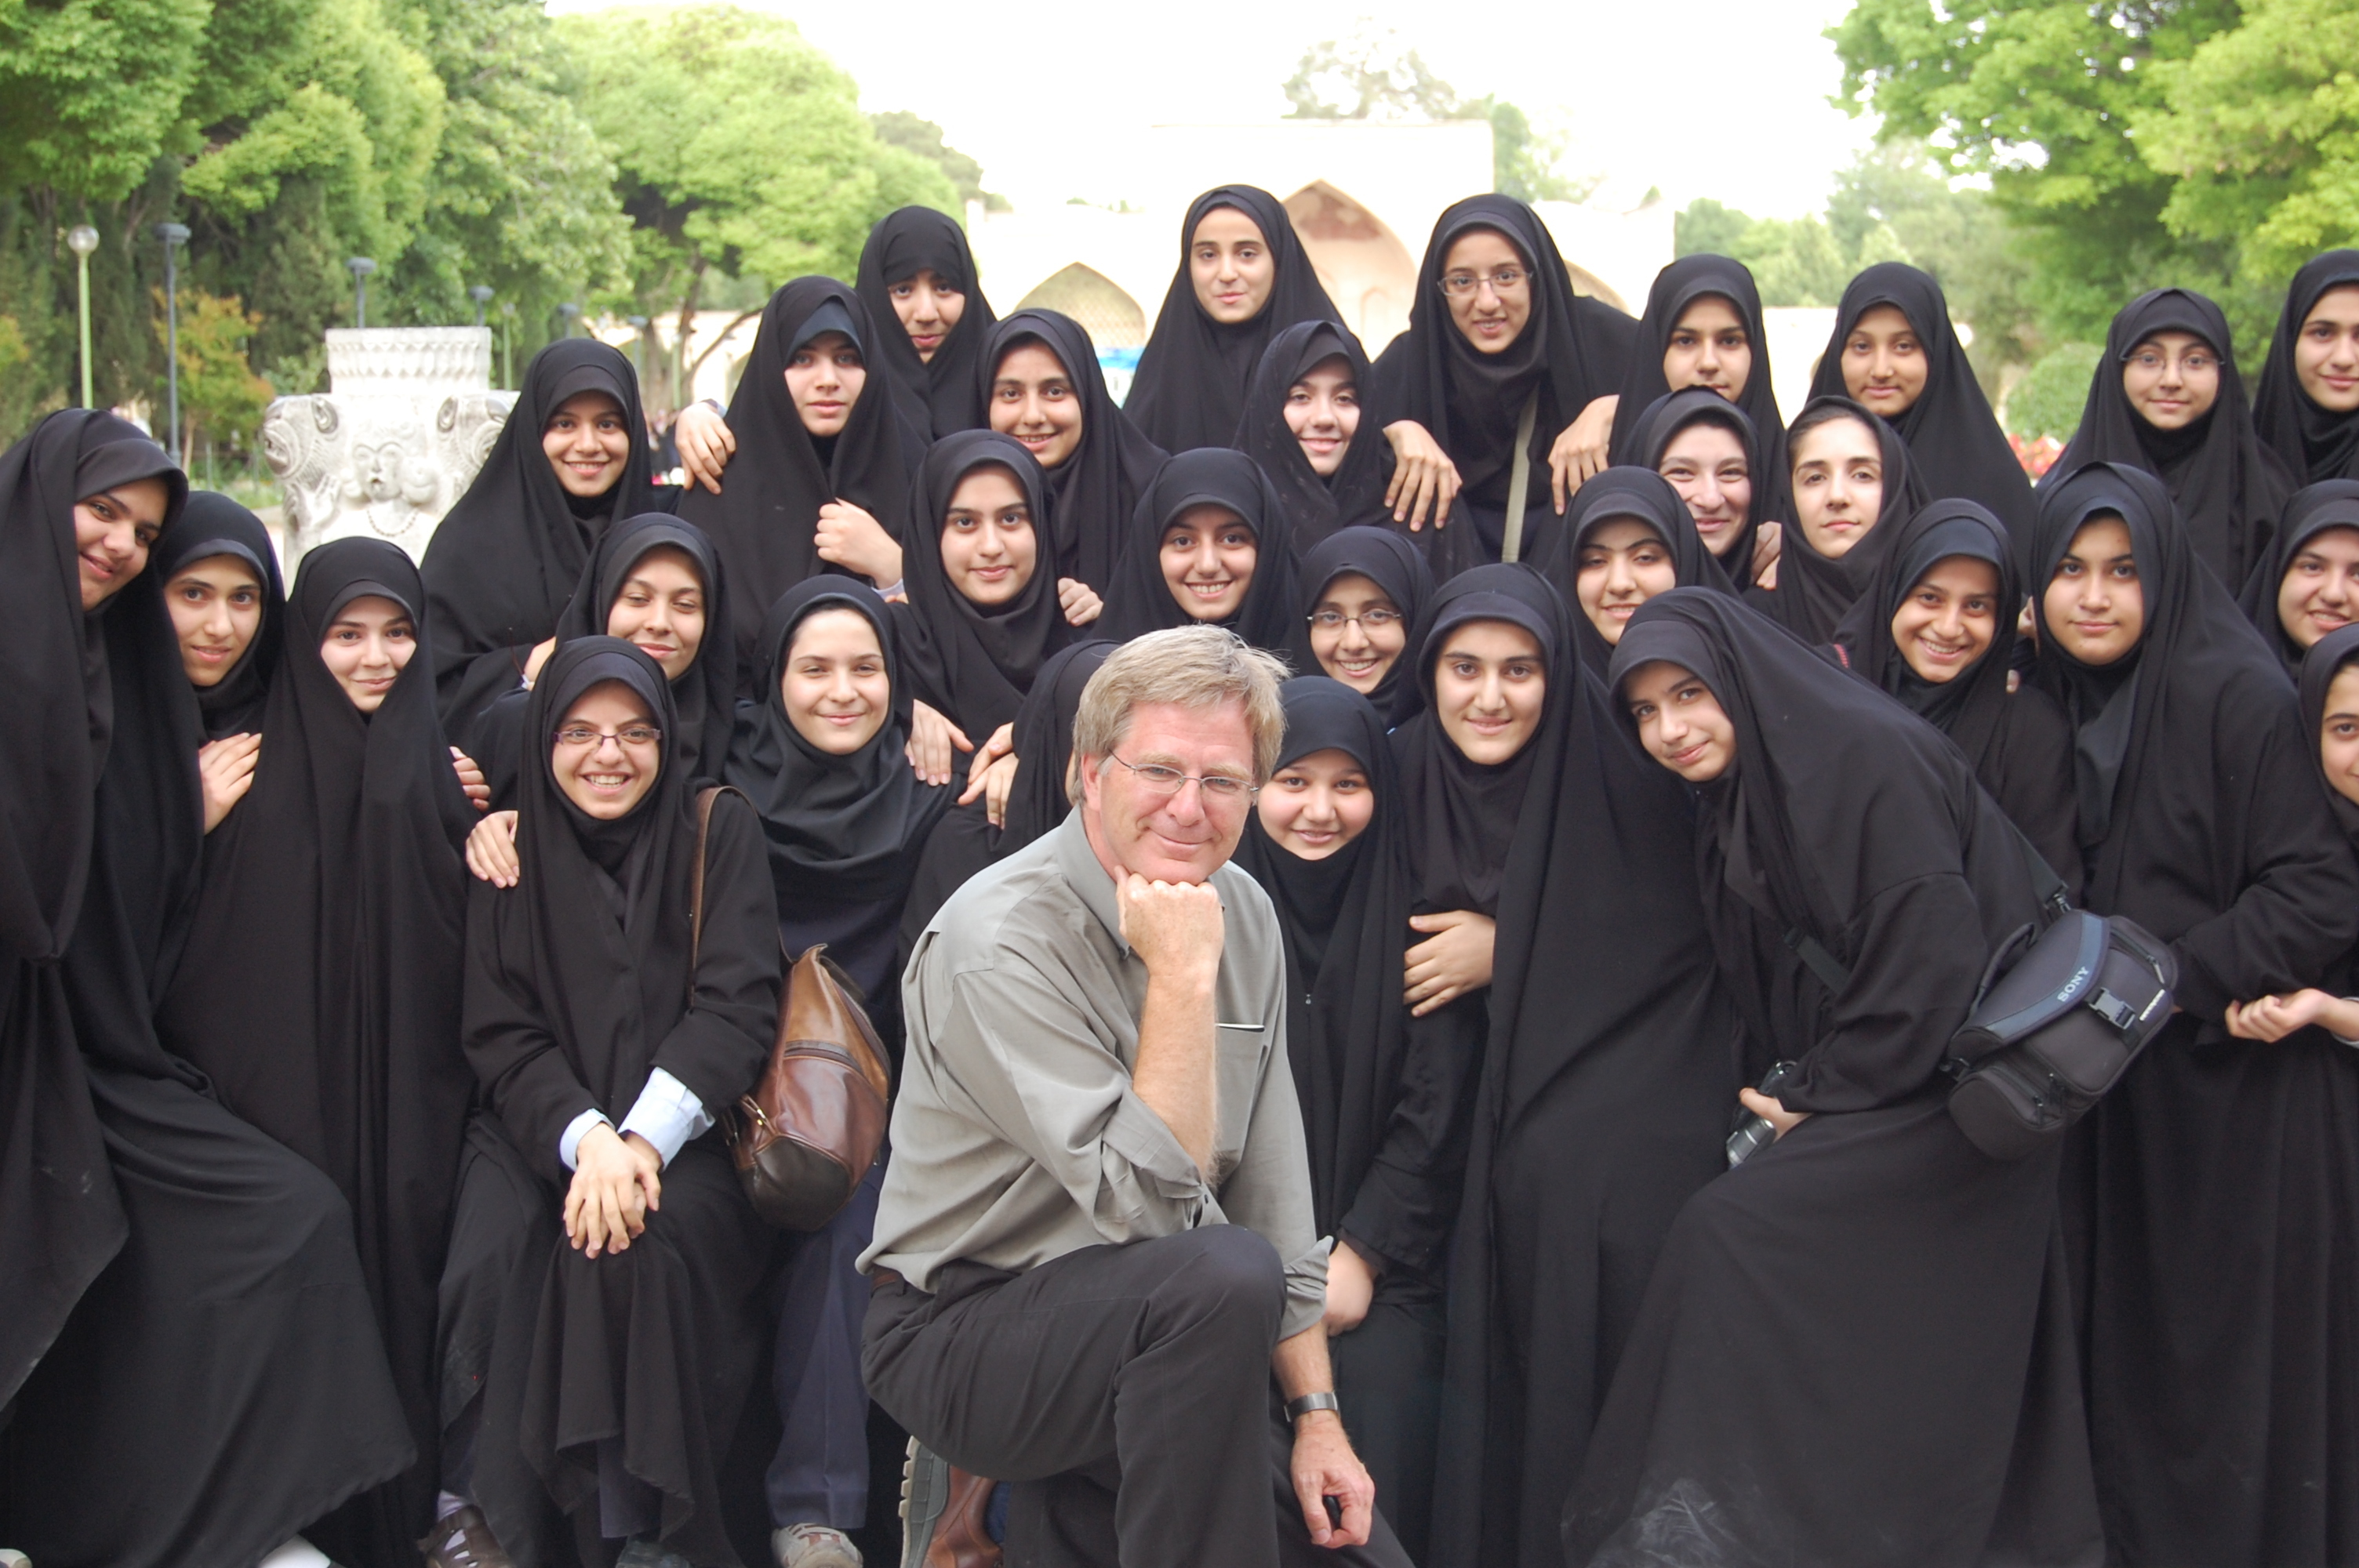 Rick Steves poses with veiled women in Iran in 2008.